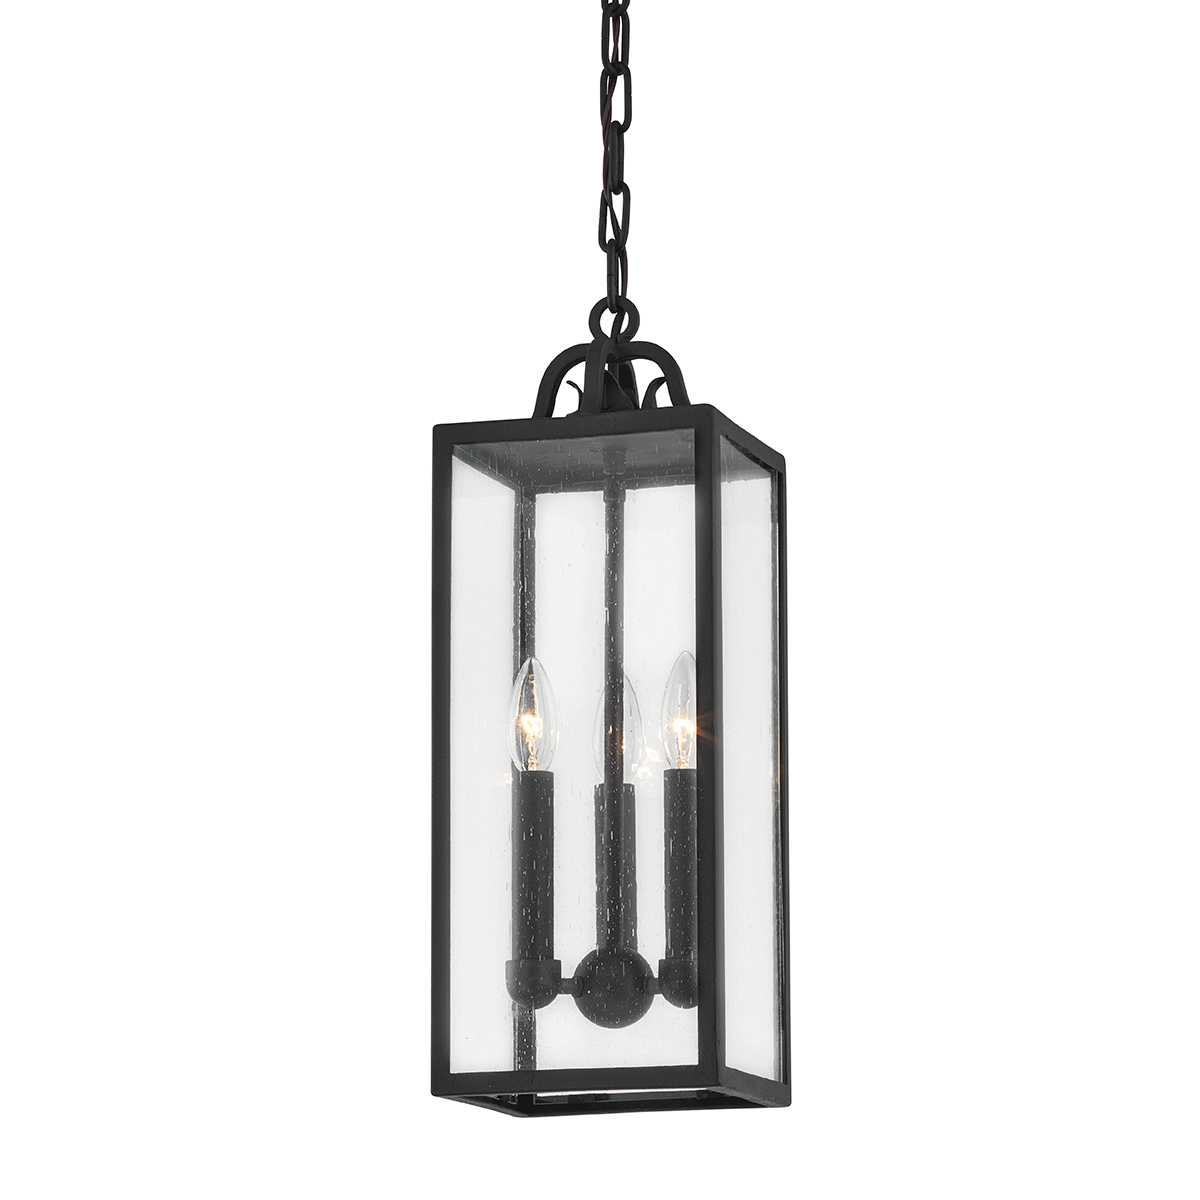 Troy CAIDEN 3 LIGHT EXTERIOR LANTERN F2066 Outdoor l Wall Troy Lighting FORGED IRON  